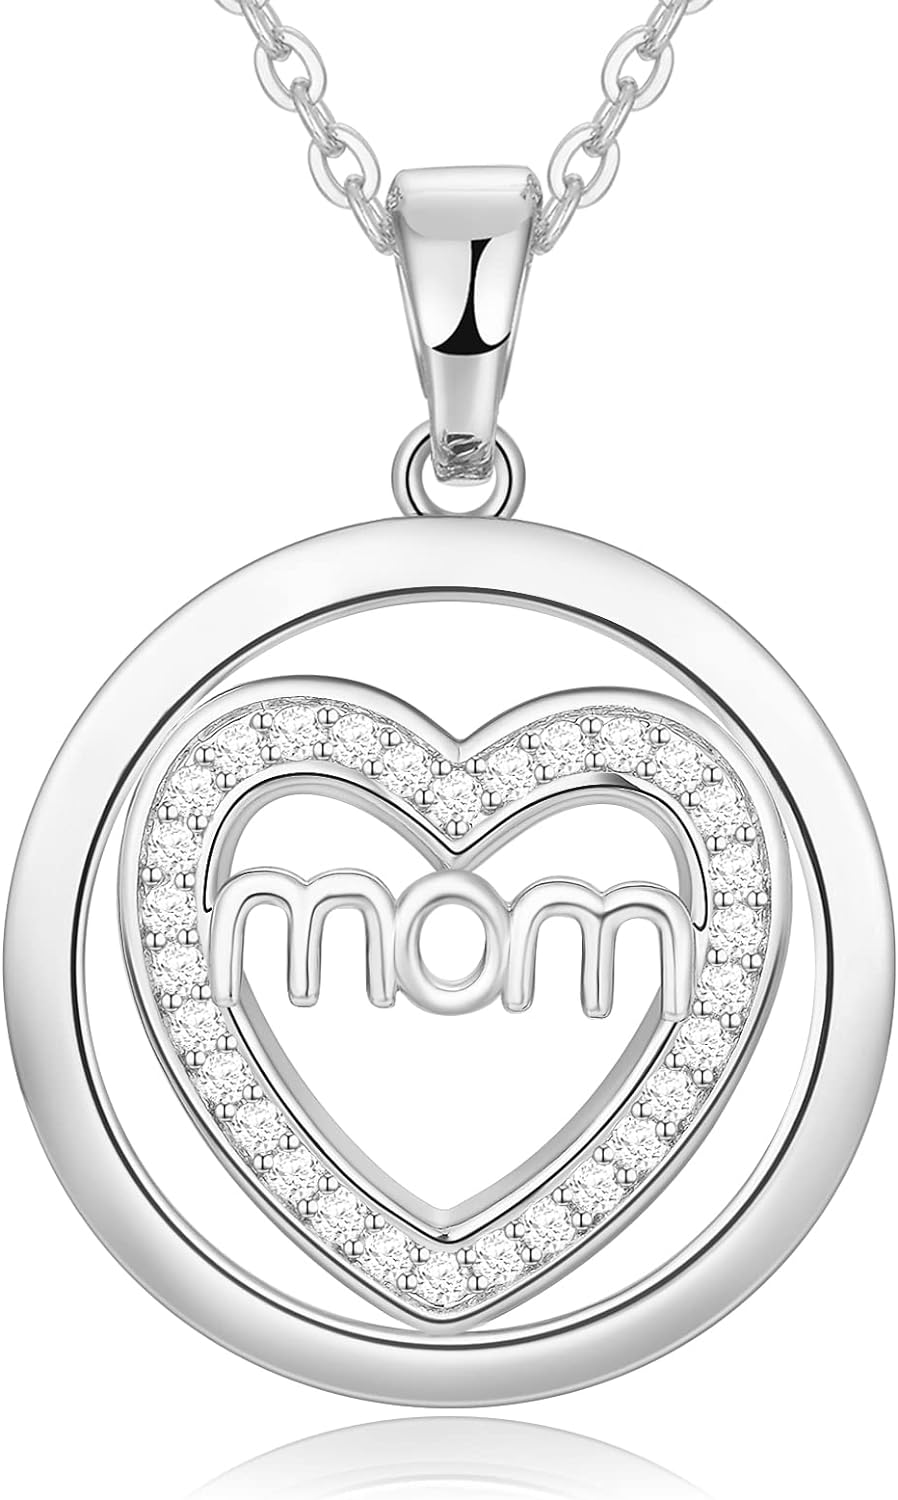 PAITAIN Circle Heart Mom Necklace, Birthday Gifts Mothers Day Gifts for Mom, 925 Sterling Silver Heart Necklace for Women Mom Grandma Wife Daughter Girlfriend on Valentine's Day Anniversary Thanksg